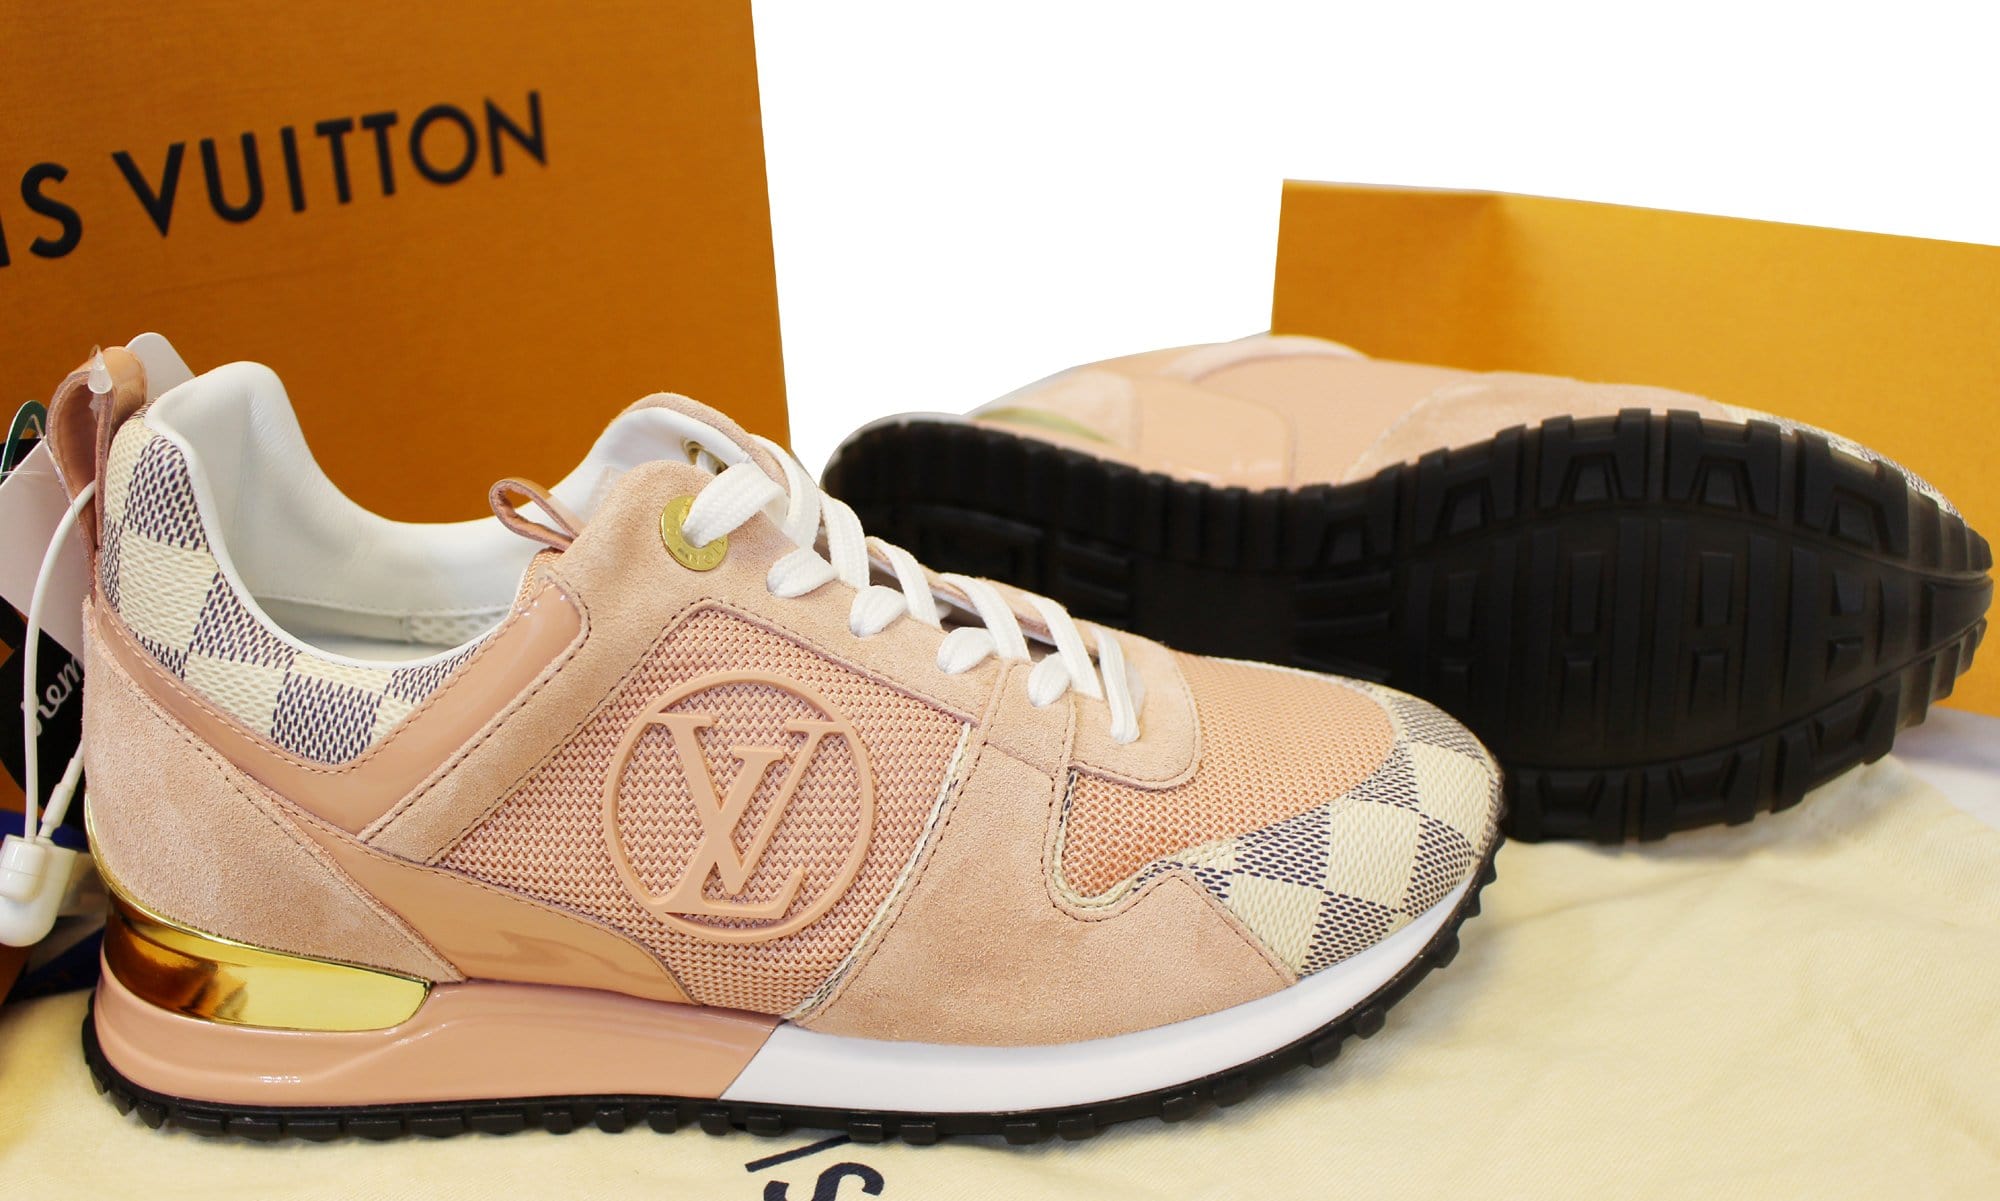 High Quality LOUIS VUITTON Sneakers for Women in Wuse 2 - Shoes,  Bizzcouture Abiola